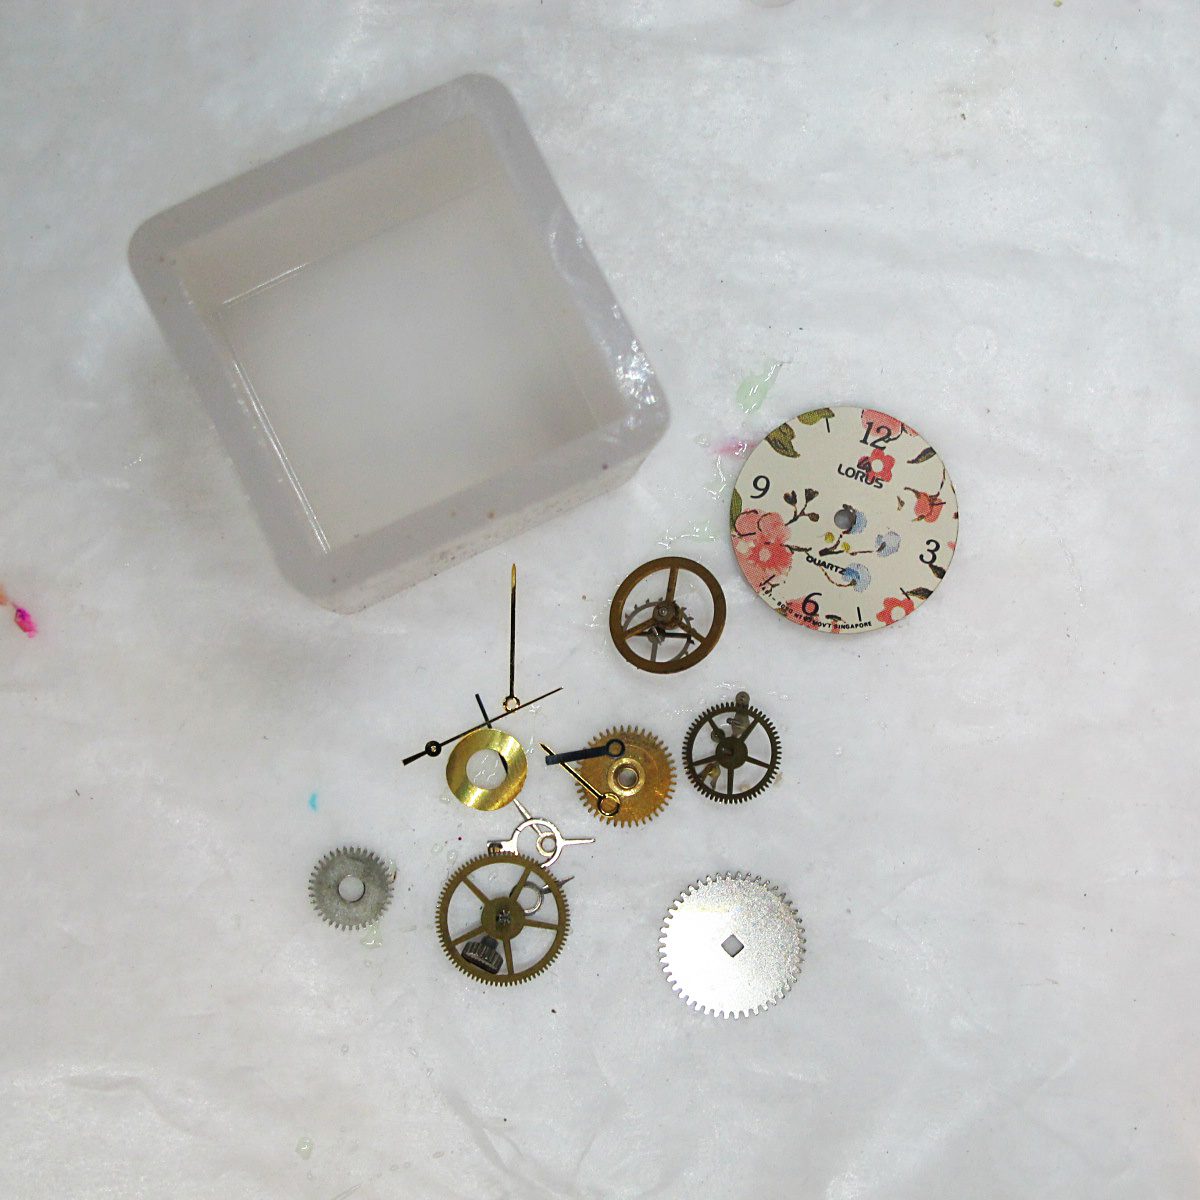 silicone mold and watch parts